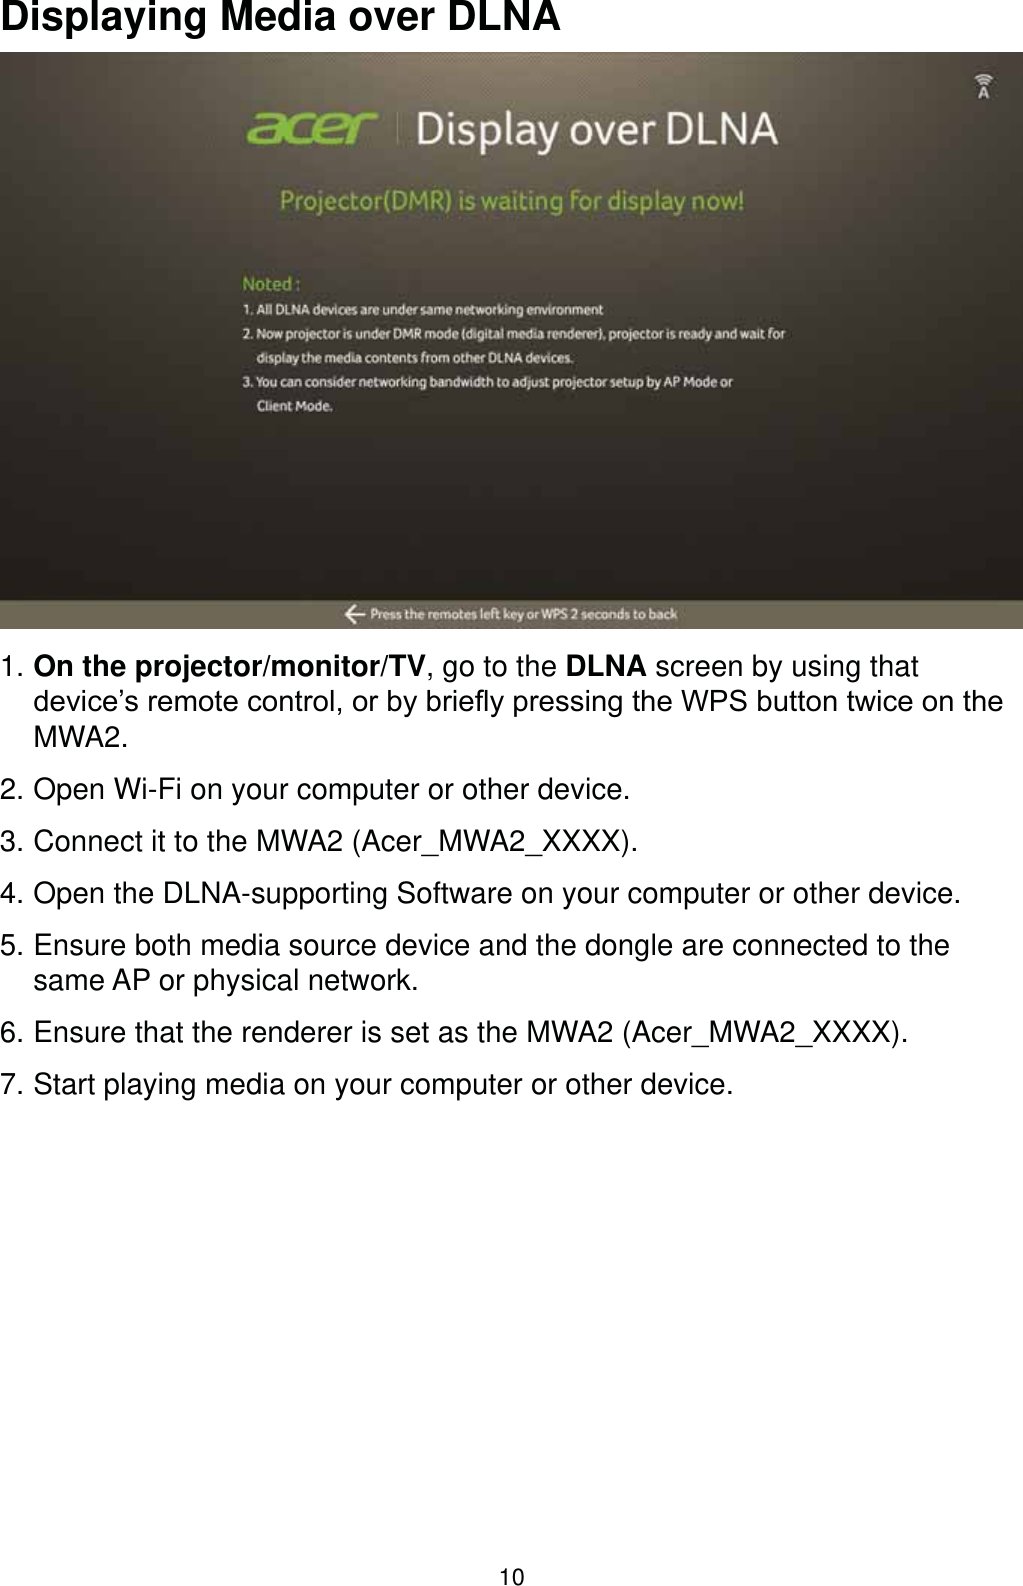 10Displaying Media over DLNA1. On the projector/monitor/TV, go to the DLNA screen by using that GHYLFH¶VUHPRWHFRQWURORUE\EULHÀ\SUHVVLQJWKH:36EXWWRQWZLFHRQWKHMWA2.2. Open Wi-Fi on your computer or other device.3. Connect it to the MWA2 (Acer_MWA2_XXXX). 4. Open the DLNA-supporting Software on your computer or other device. 5. Ensure both media source device and the dongle are connected to the same AP or physical network.6. Ensure that the renderer is set as the MWA2 (Acer_MWA2_XXXX).7. Start playing media on your computer or other device.